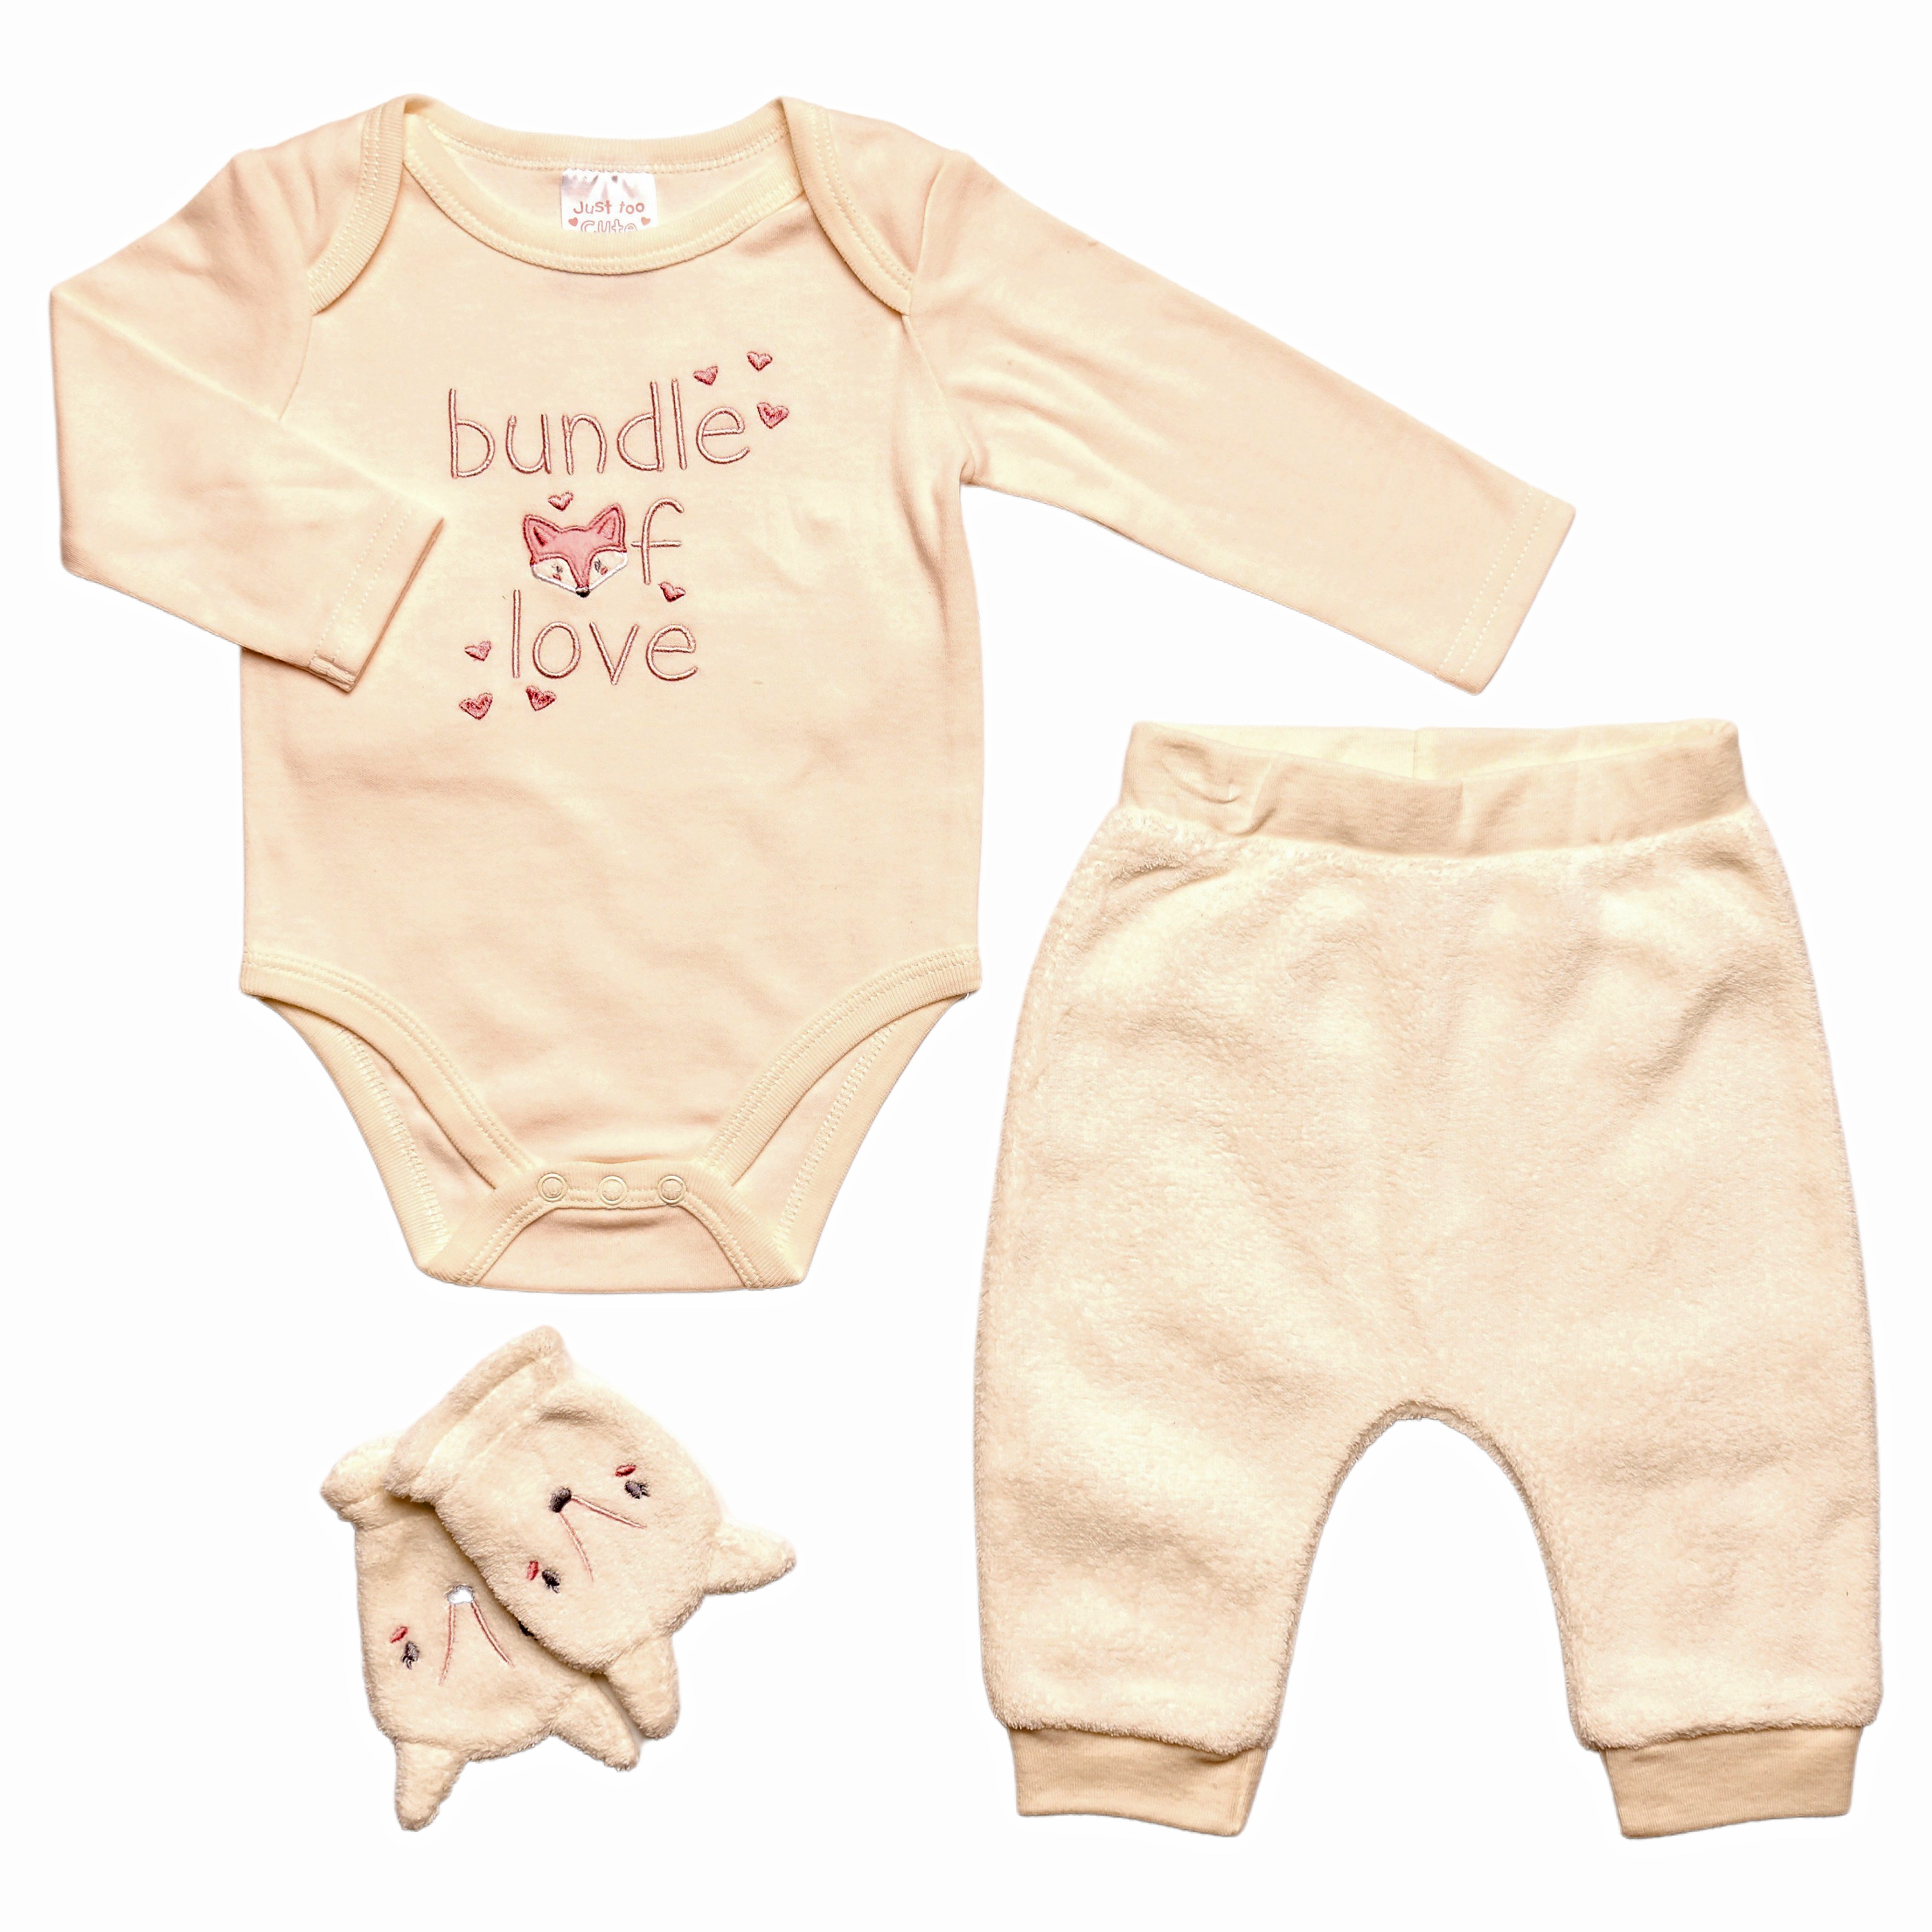 Our two tone baby clothing gift set is ideal for both boys and girls. The baby bodysuit is an easy on, easy off and has a lovely tailored look that goes perfectly with the coordinating mittens and pants.